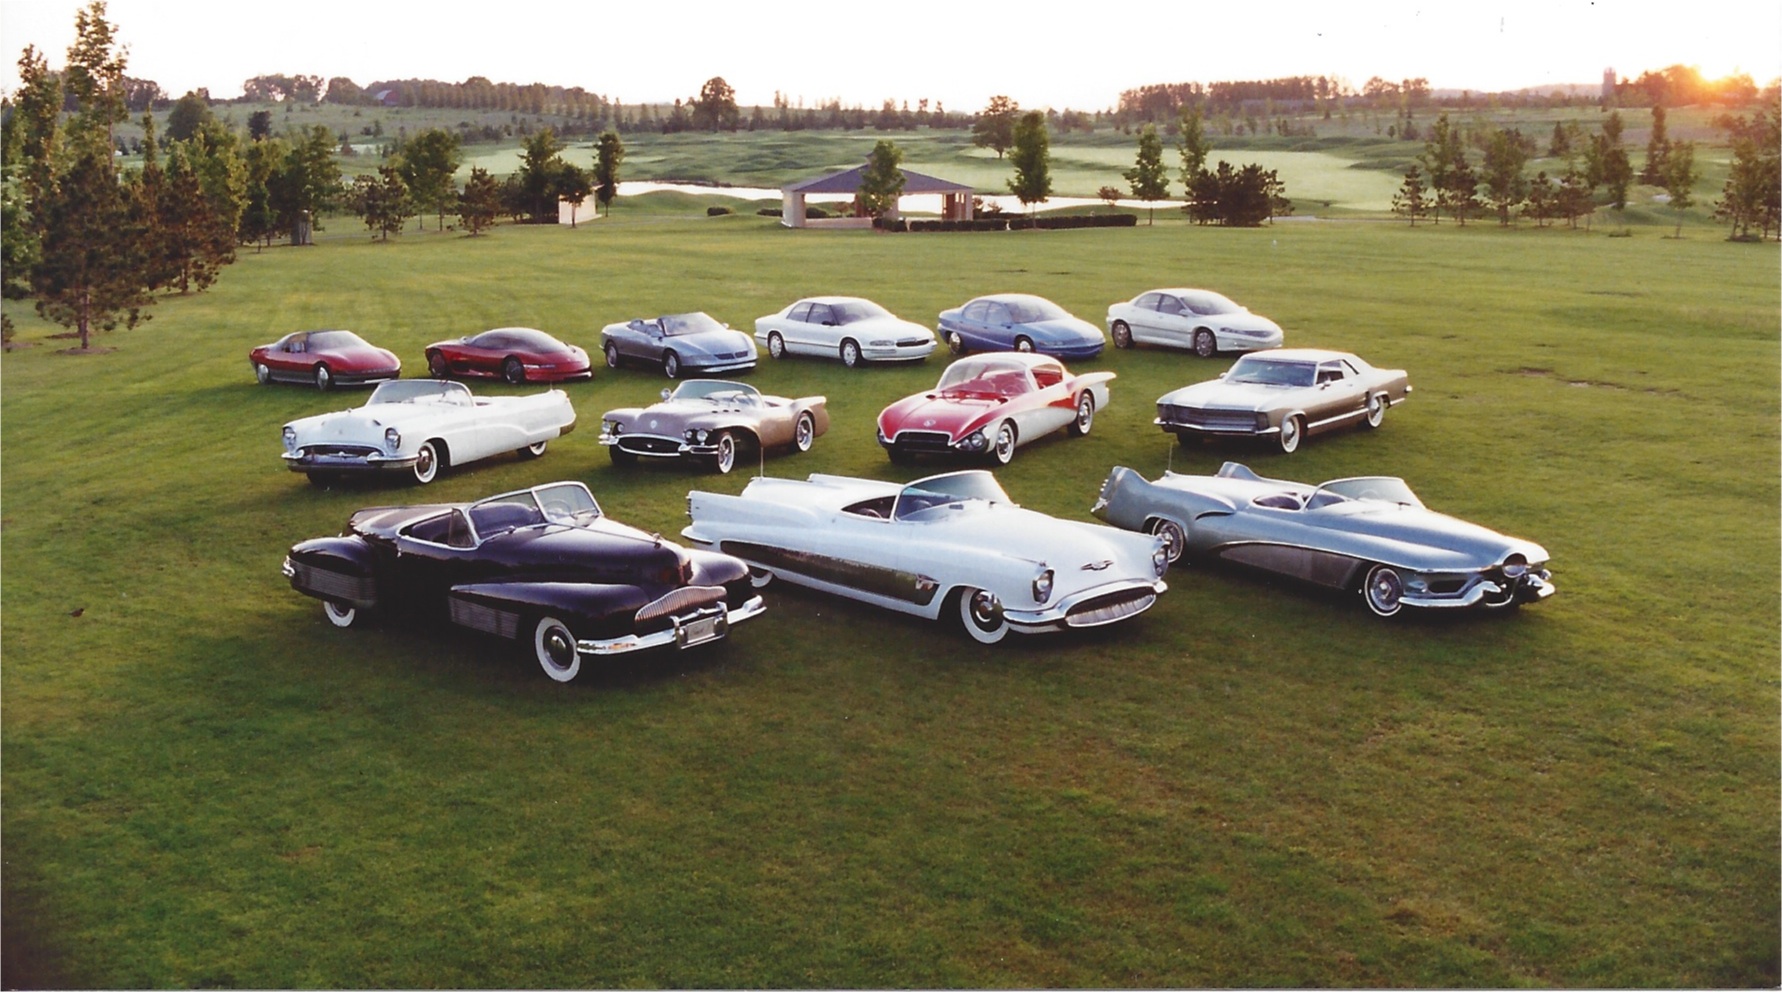 General Motors official photo of the Buick Dream Cars/Concept Cars circa 1994